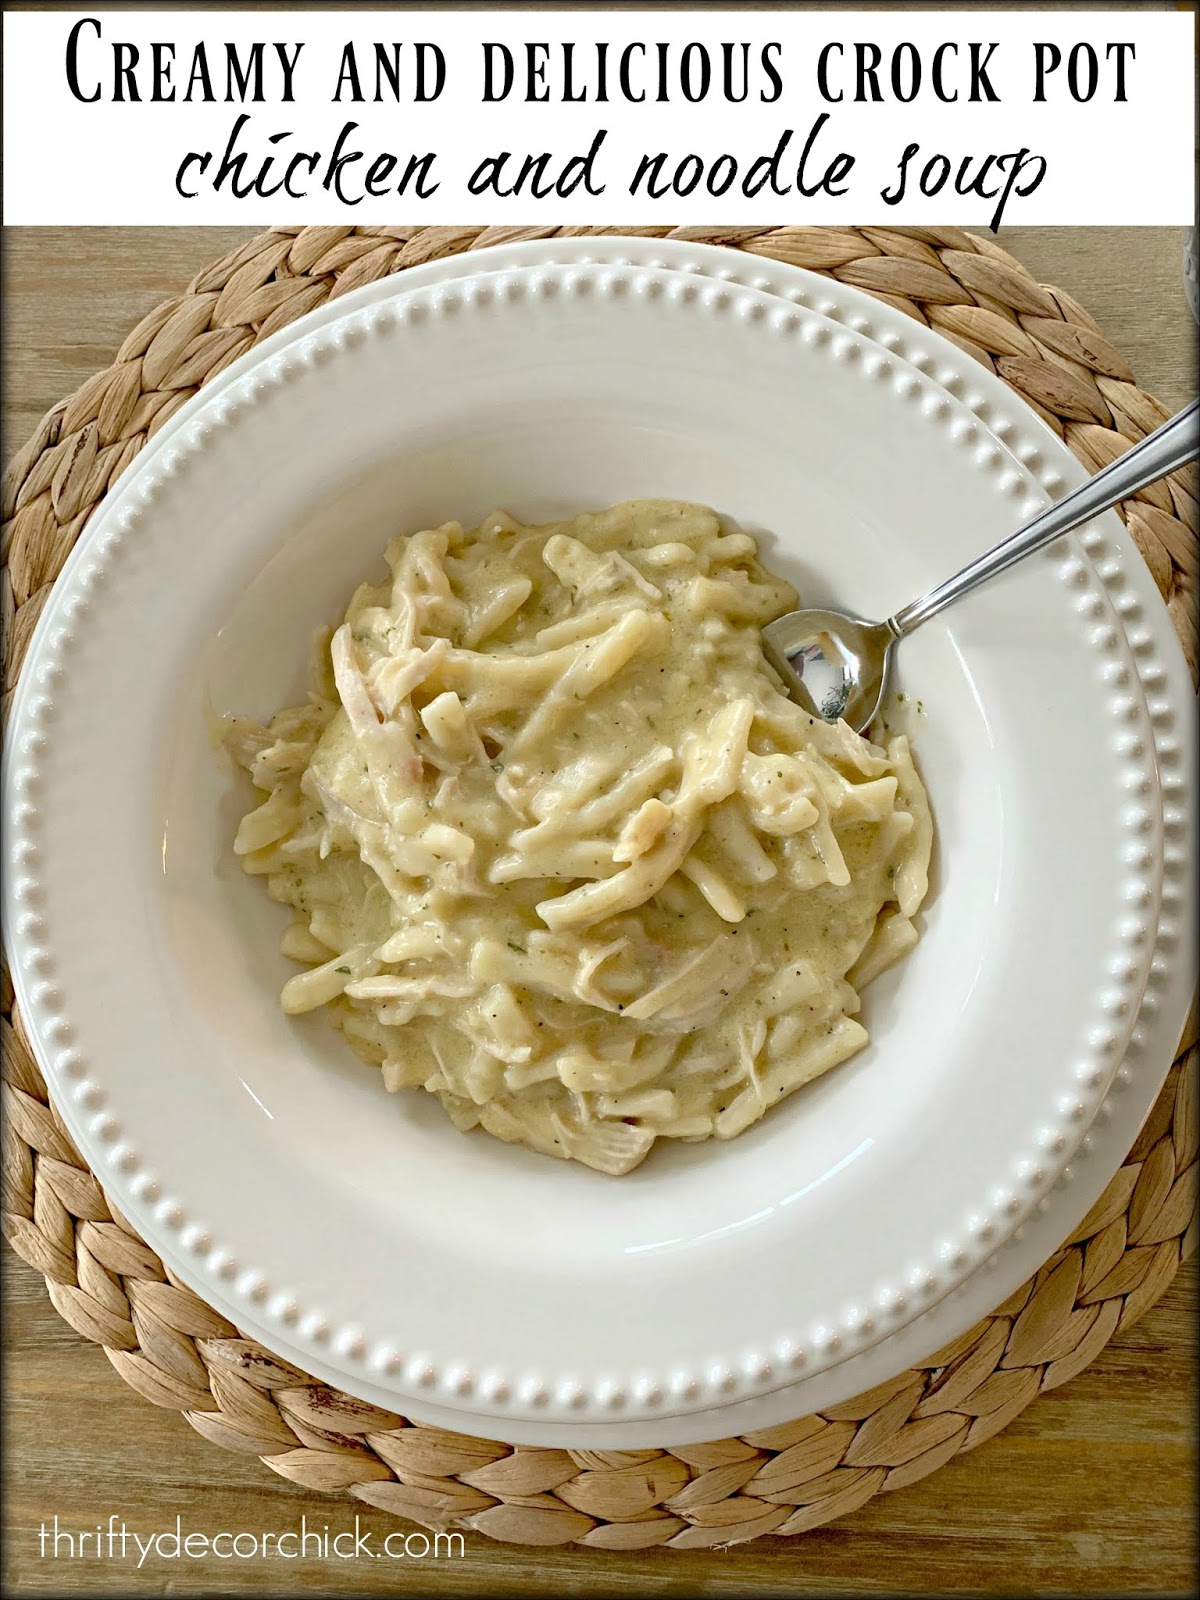 Easy crock pot chicken and noodle soup